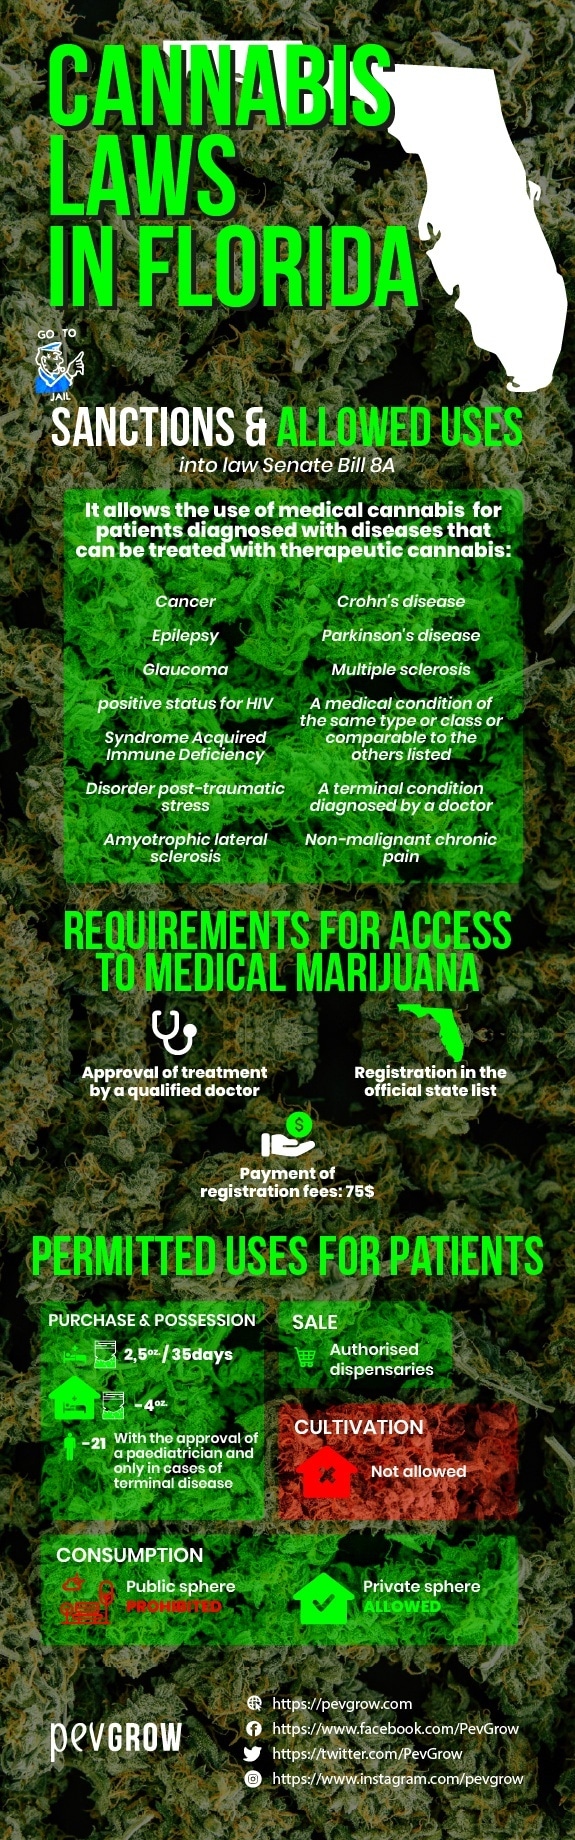 Florida cannabis laws -sanctions and permitted uses-.